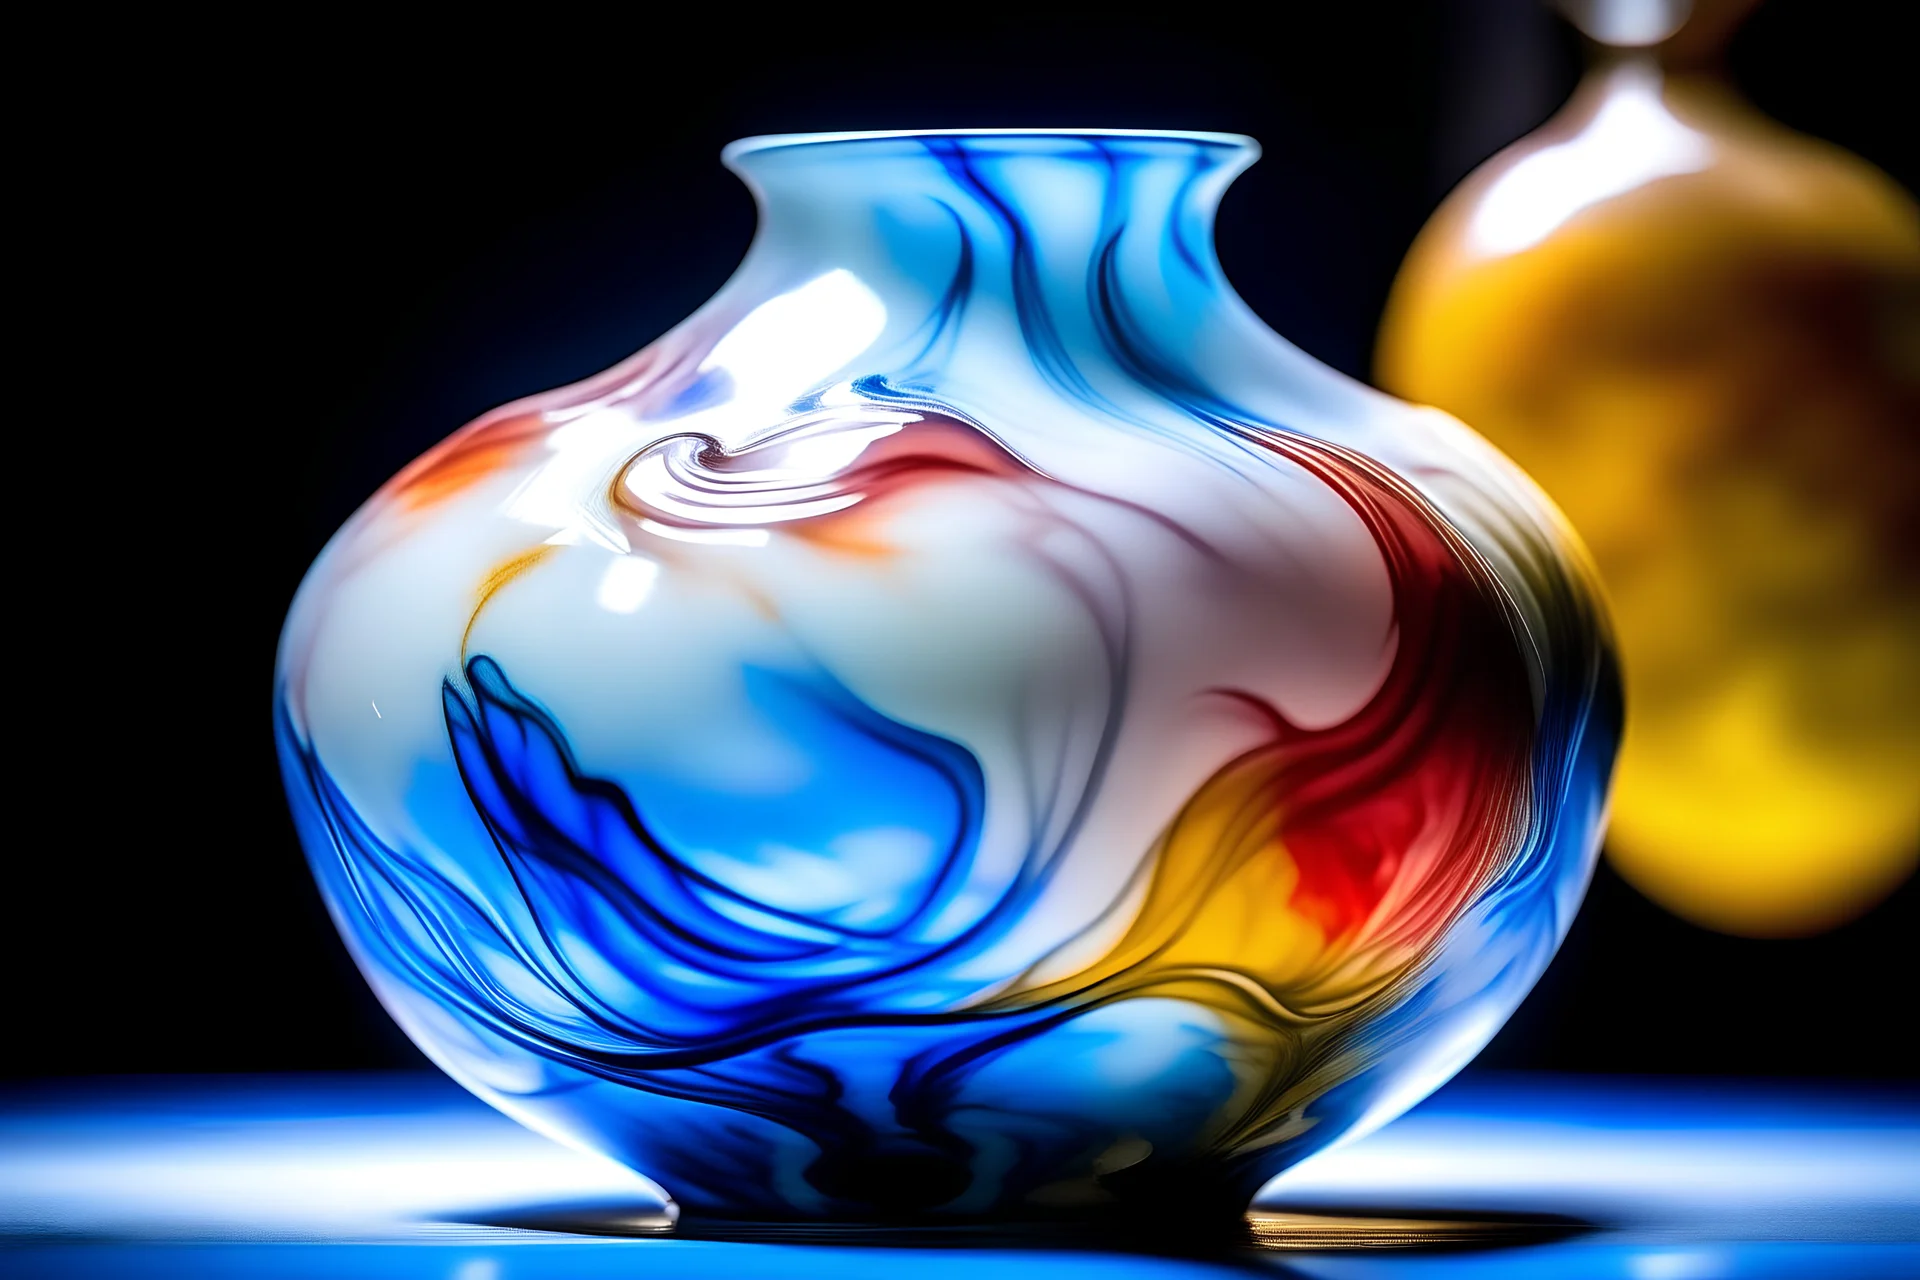 Please artistic photograph of an inverted, distorted porcelain vase in a hot tub. Create a close-up, foggy, chromatic technicolor, and dreamlike atmosphere. Consider using lenses like sigma 85mm f/1.4, 15mm, or 35mm. Opt for high resolution (e.g., 4k, 8k, HD). Experiment with smears of primary color on the film. Thanks.